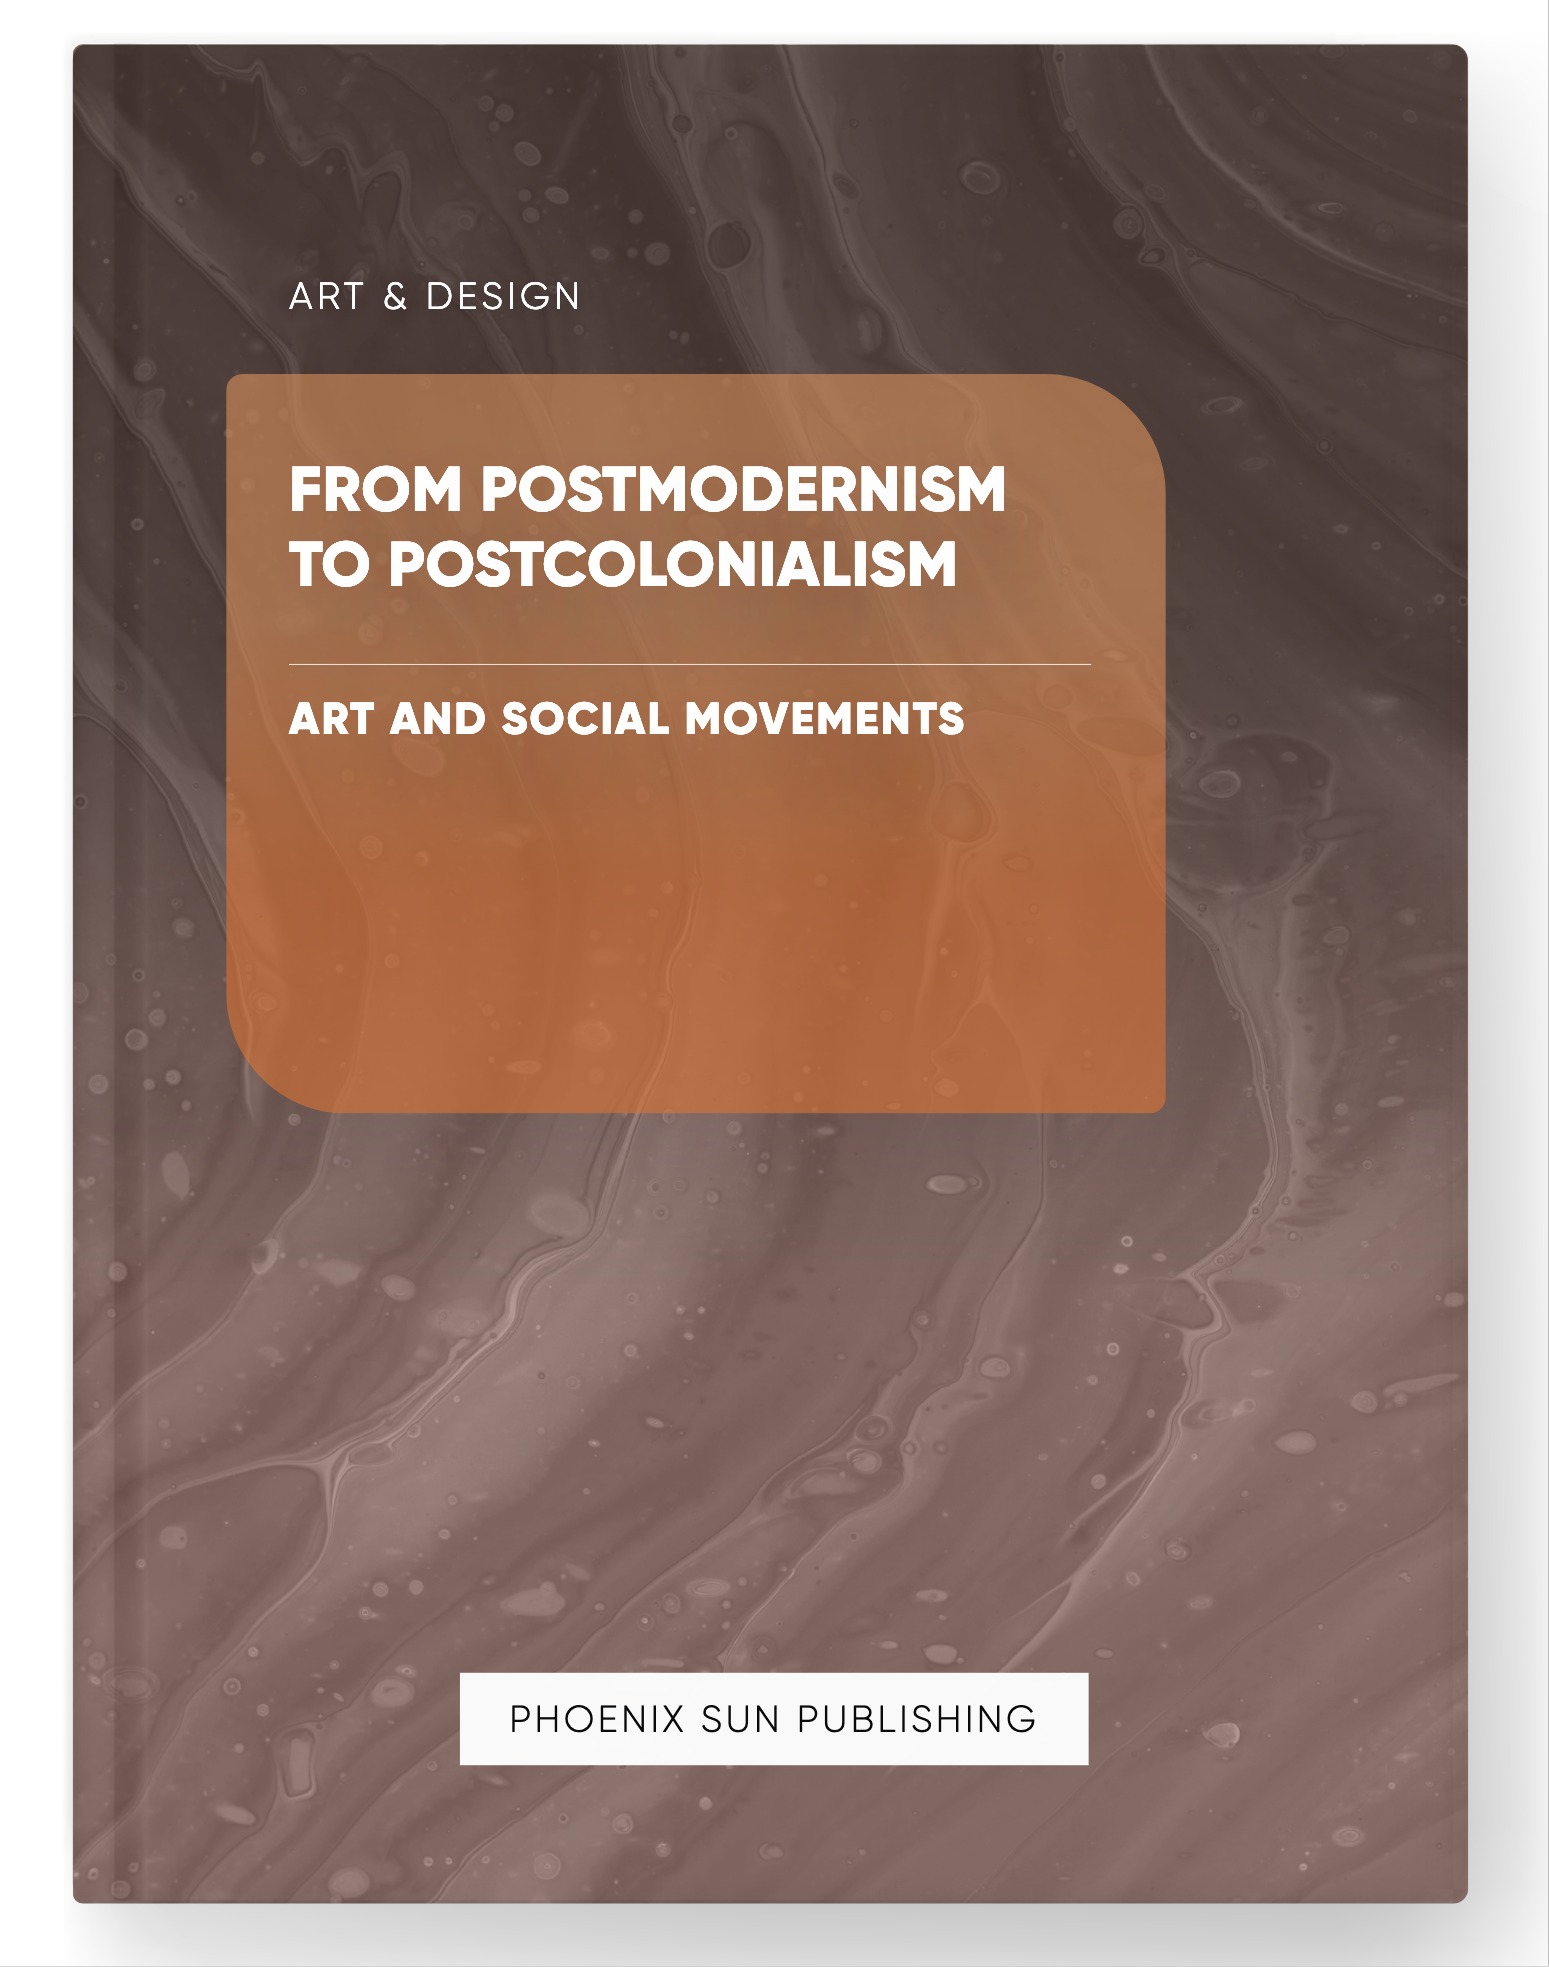 From Postmodernism to Postcolonialism – Art and Social Movements